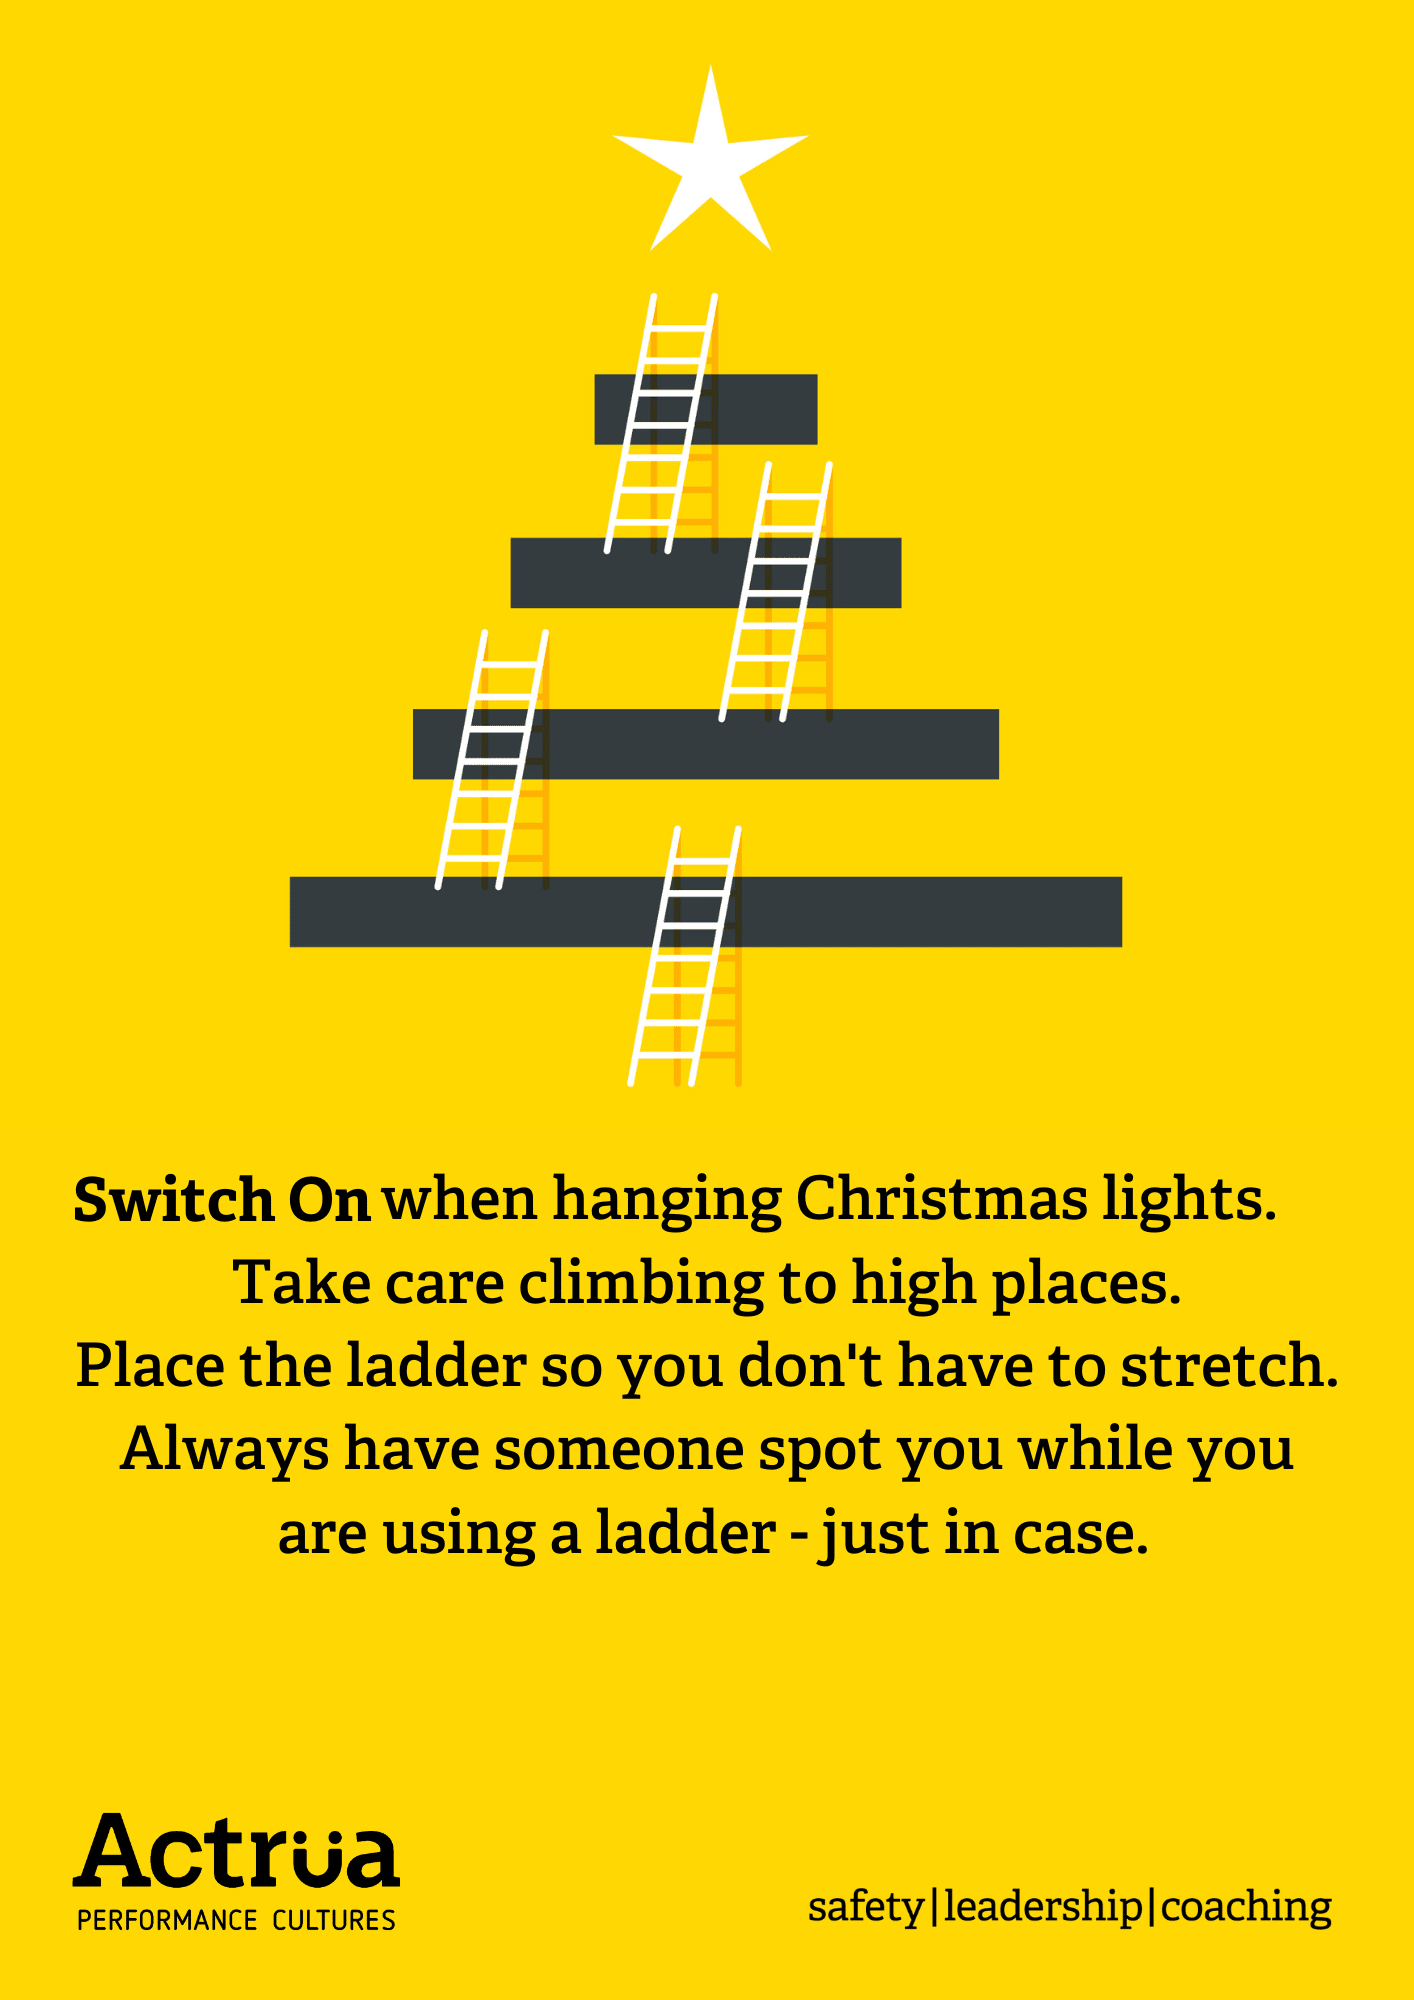 Switch On when hanging lights and decorations this Christmas. Be ladder safe.